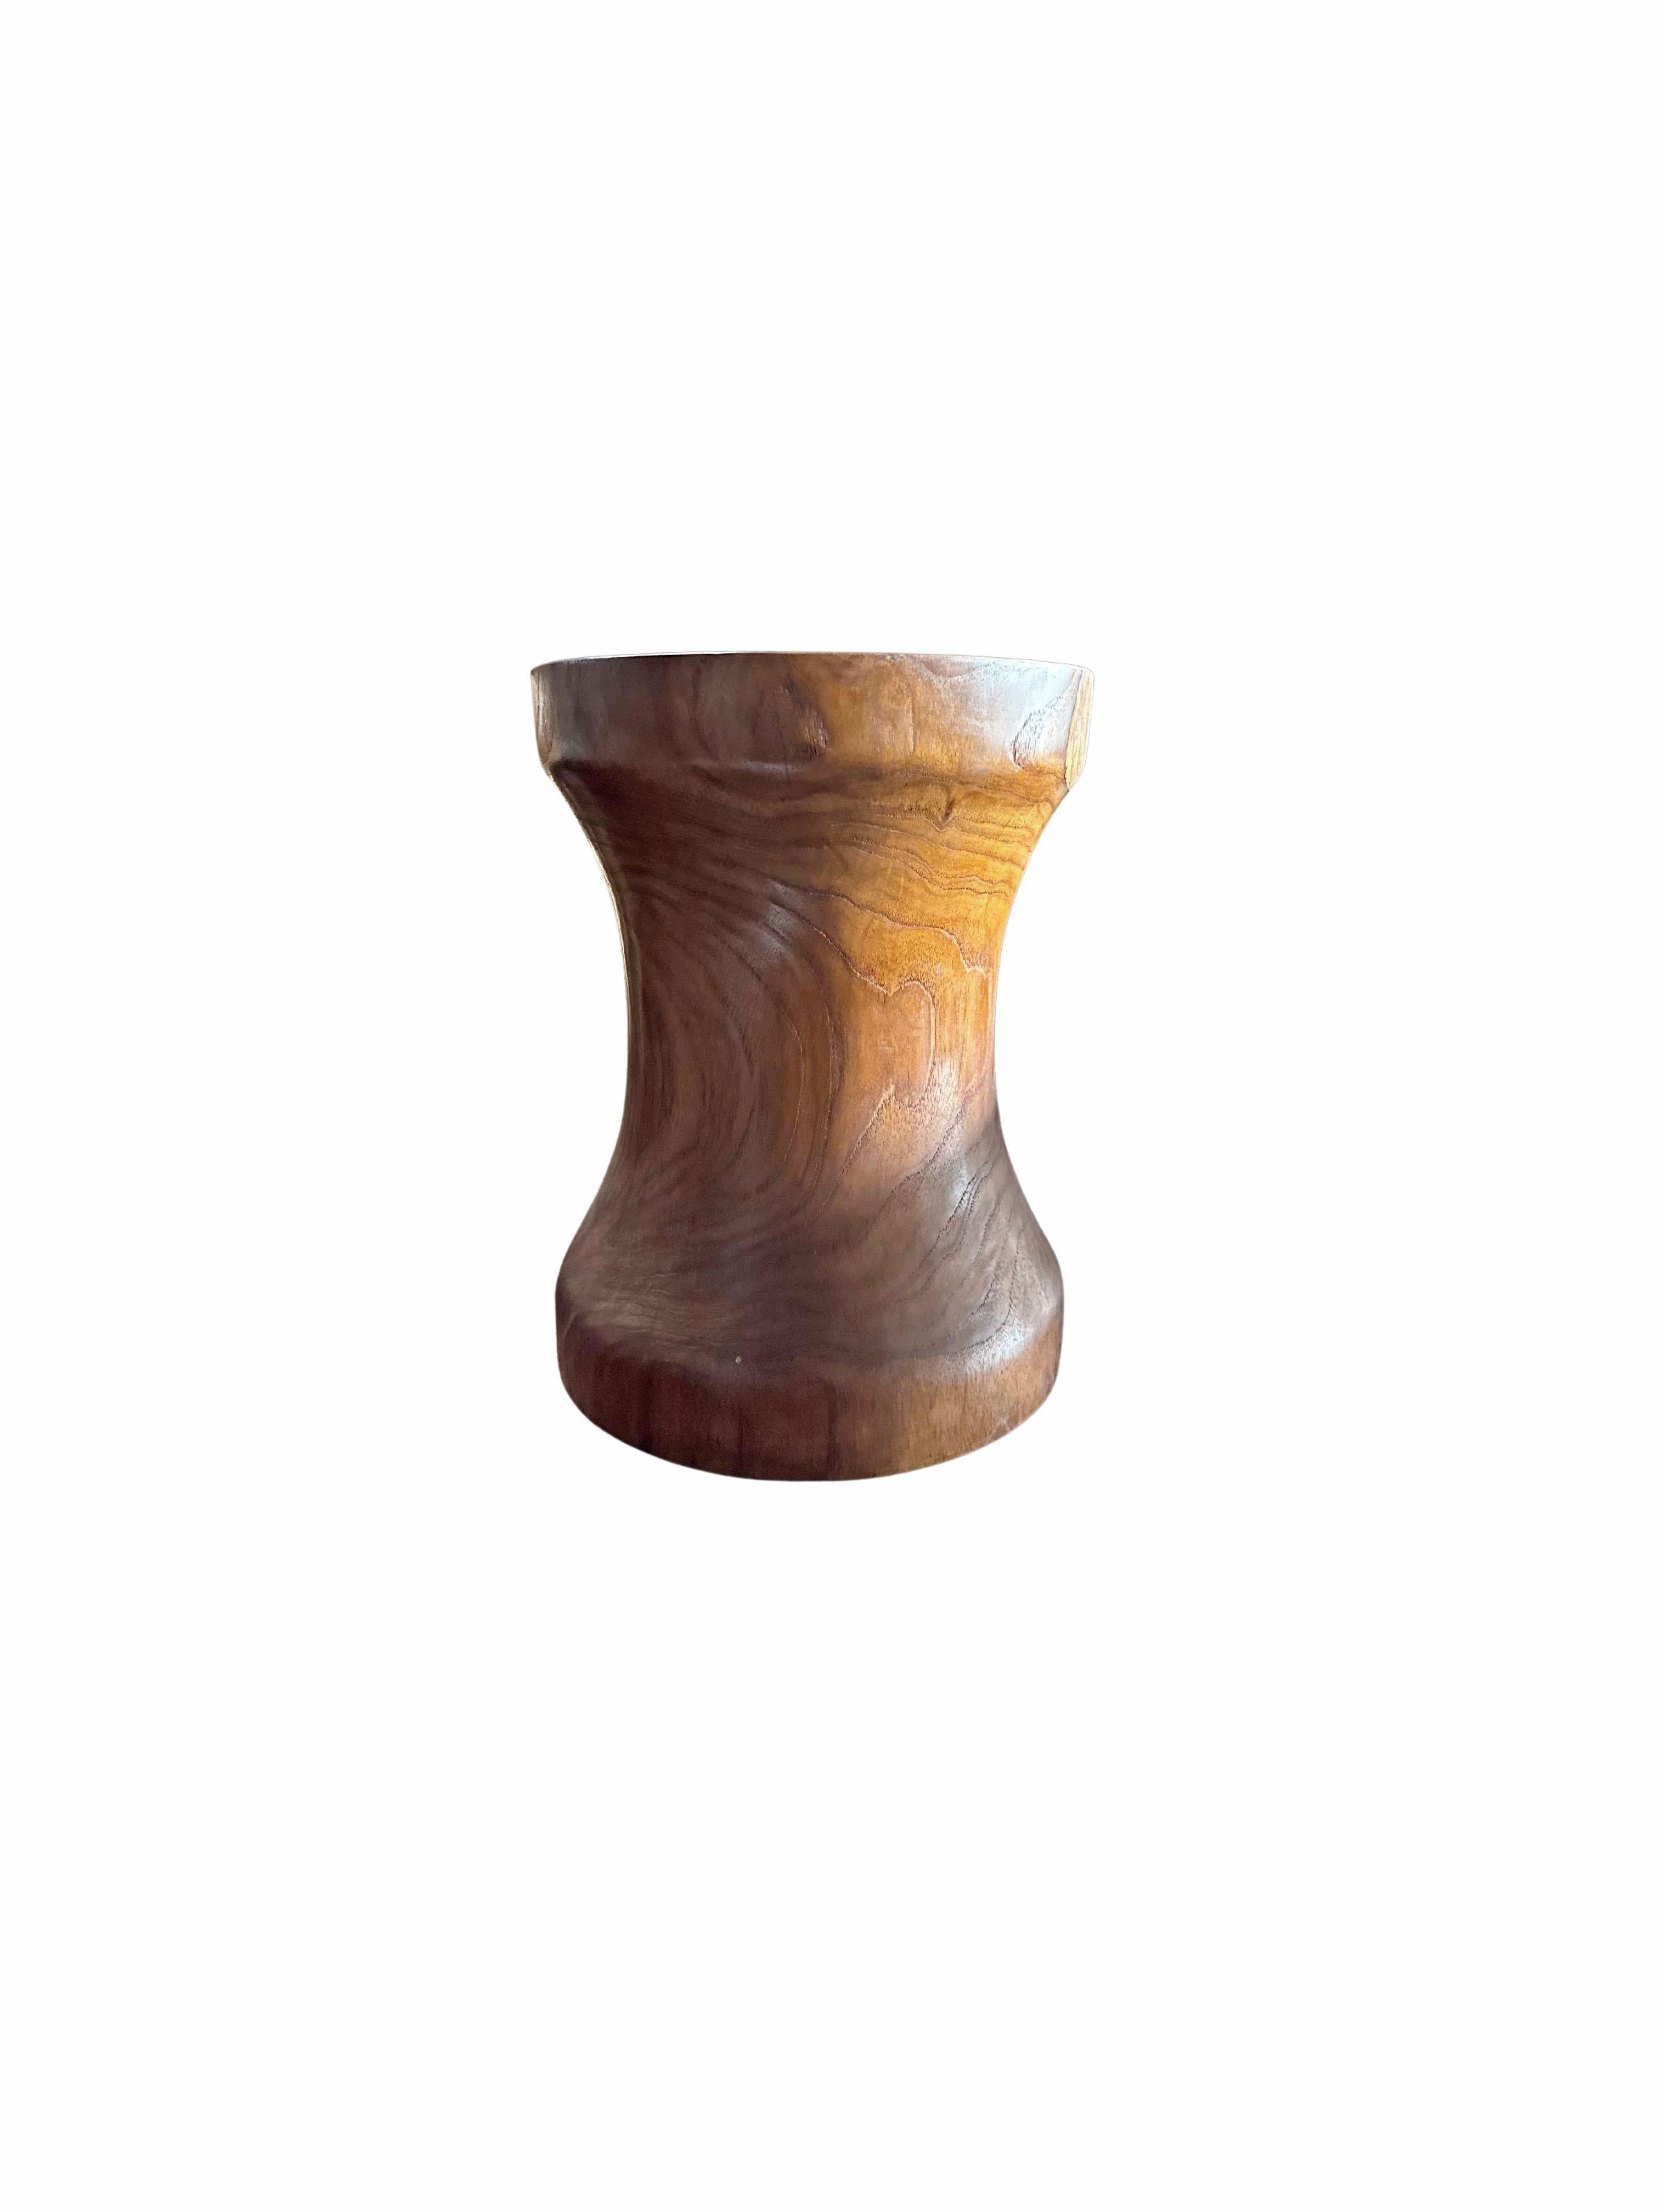 A wonderfully sculptural side table crafted from Teak Wood. Its curved edges add to its charm. This table features a wonderful array of wood textures and shades. The perfect object to bring warmth to any space.